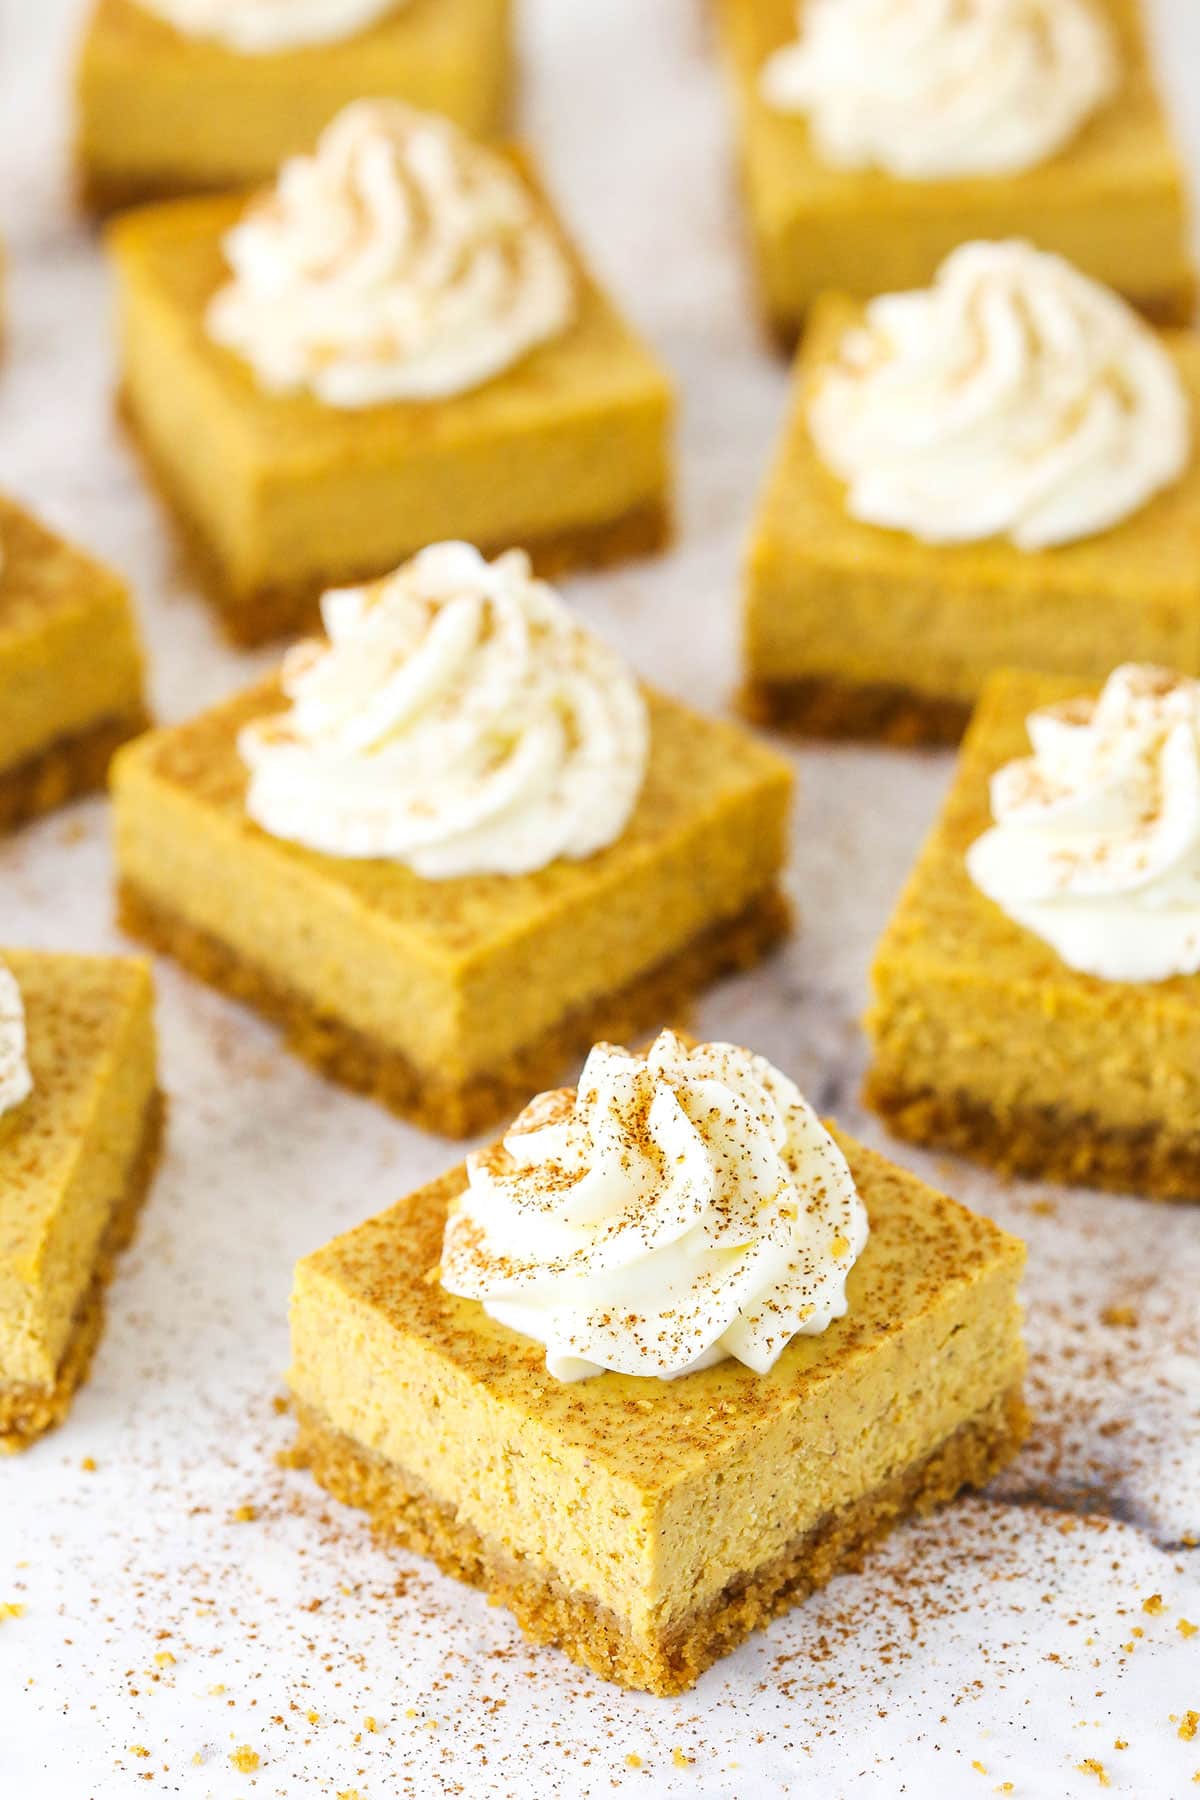 Pumpkin Cheesecake Bars topped with frosting swirls on a white table